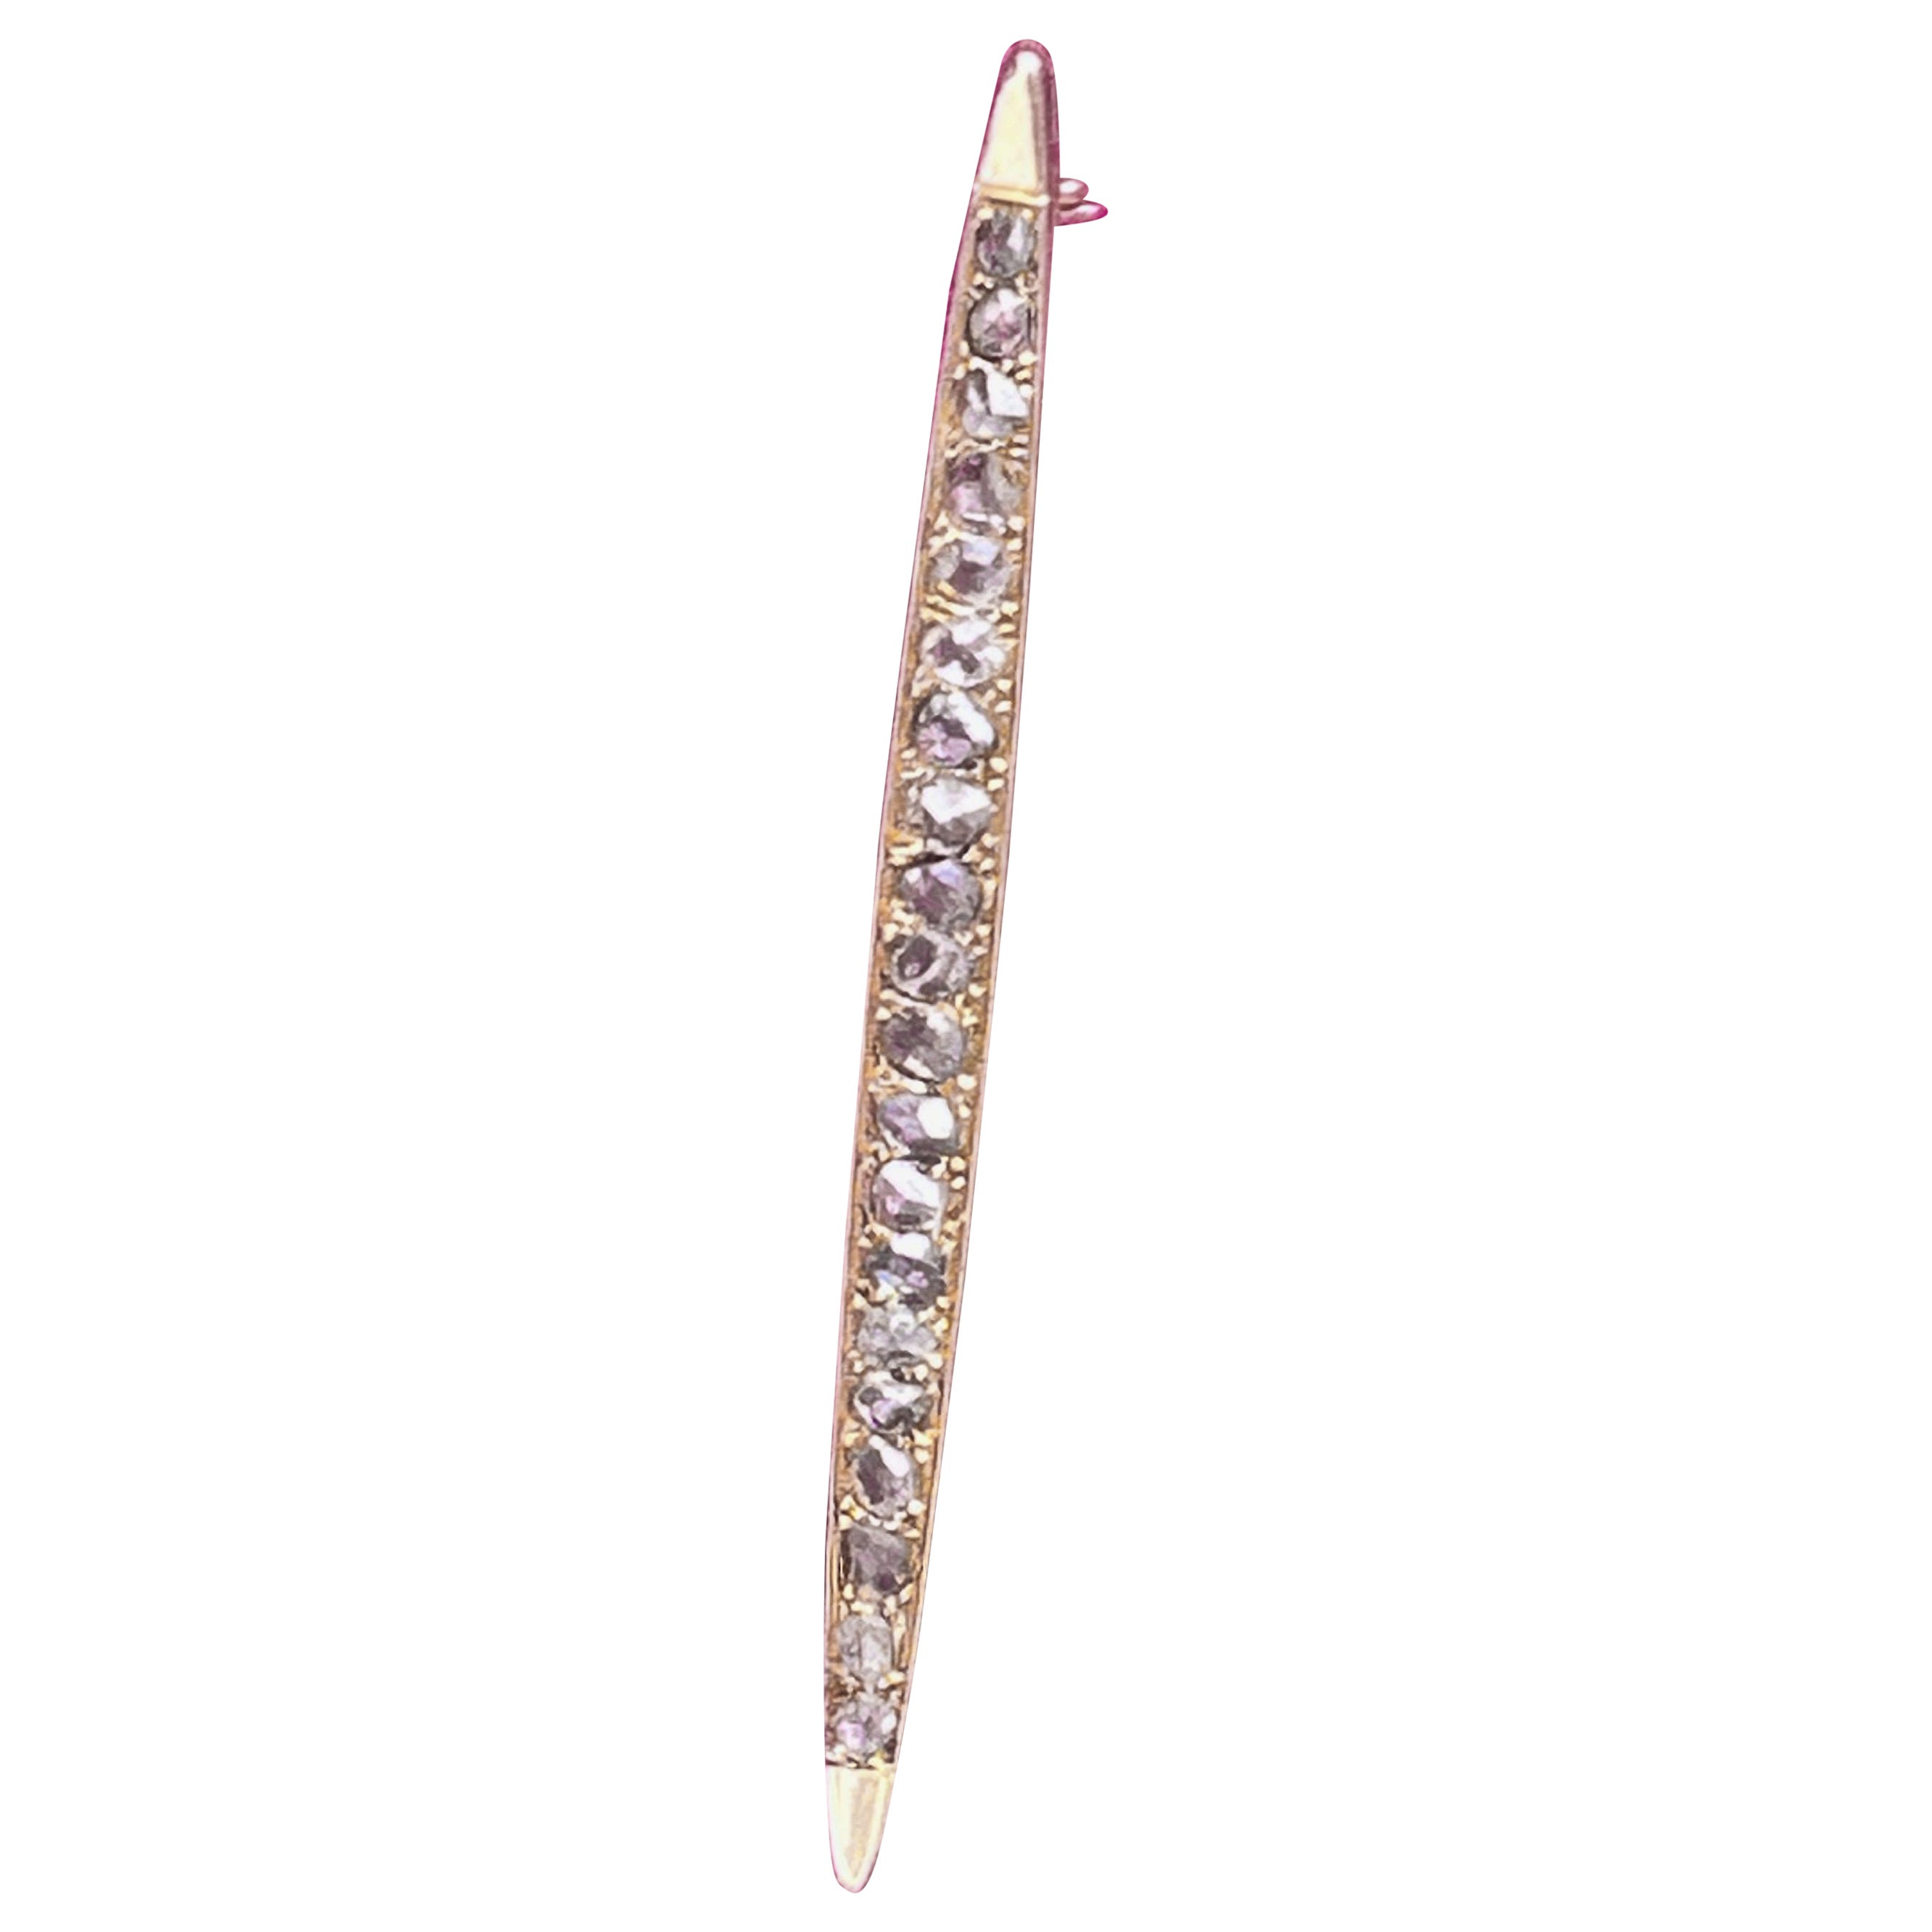 Rose Cut Diamond Bar Brooch set with 20 rose cut diamonds (approx. 3.1mm - 2mm). Approximately 1.5 ctw. Hallmarks: 585 Dutch assay mark.  LxW: approx. 6.8 x 0.5 cm. Weight: 4.47 grams.